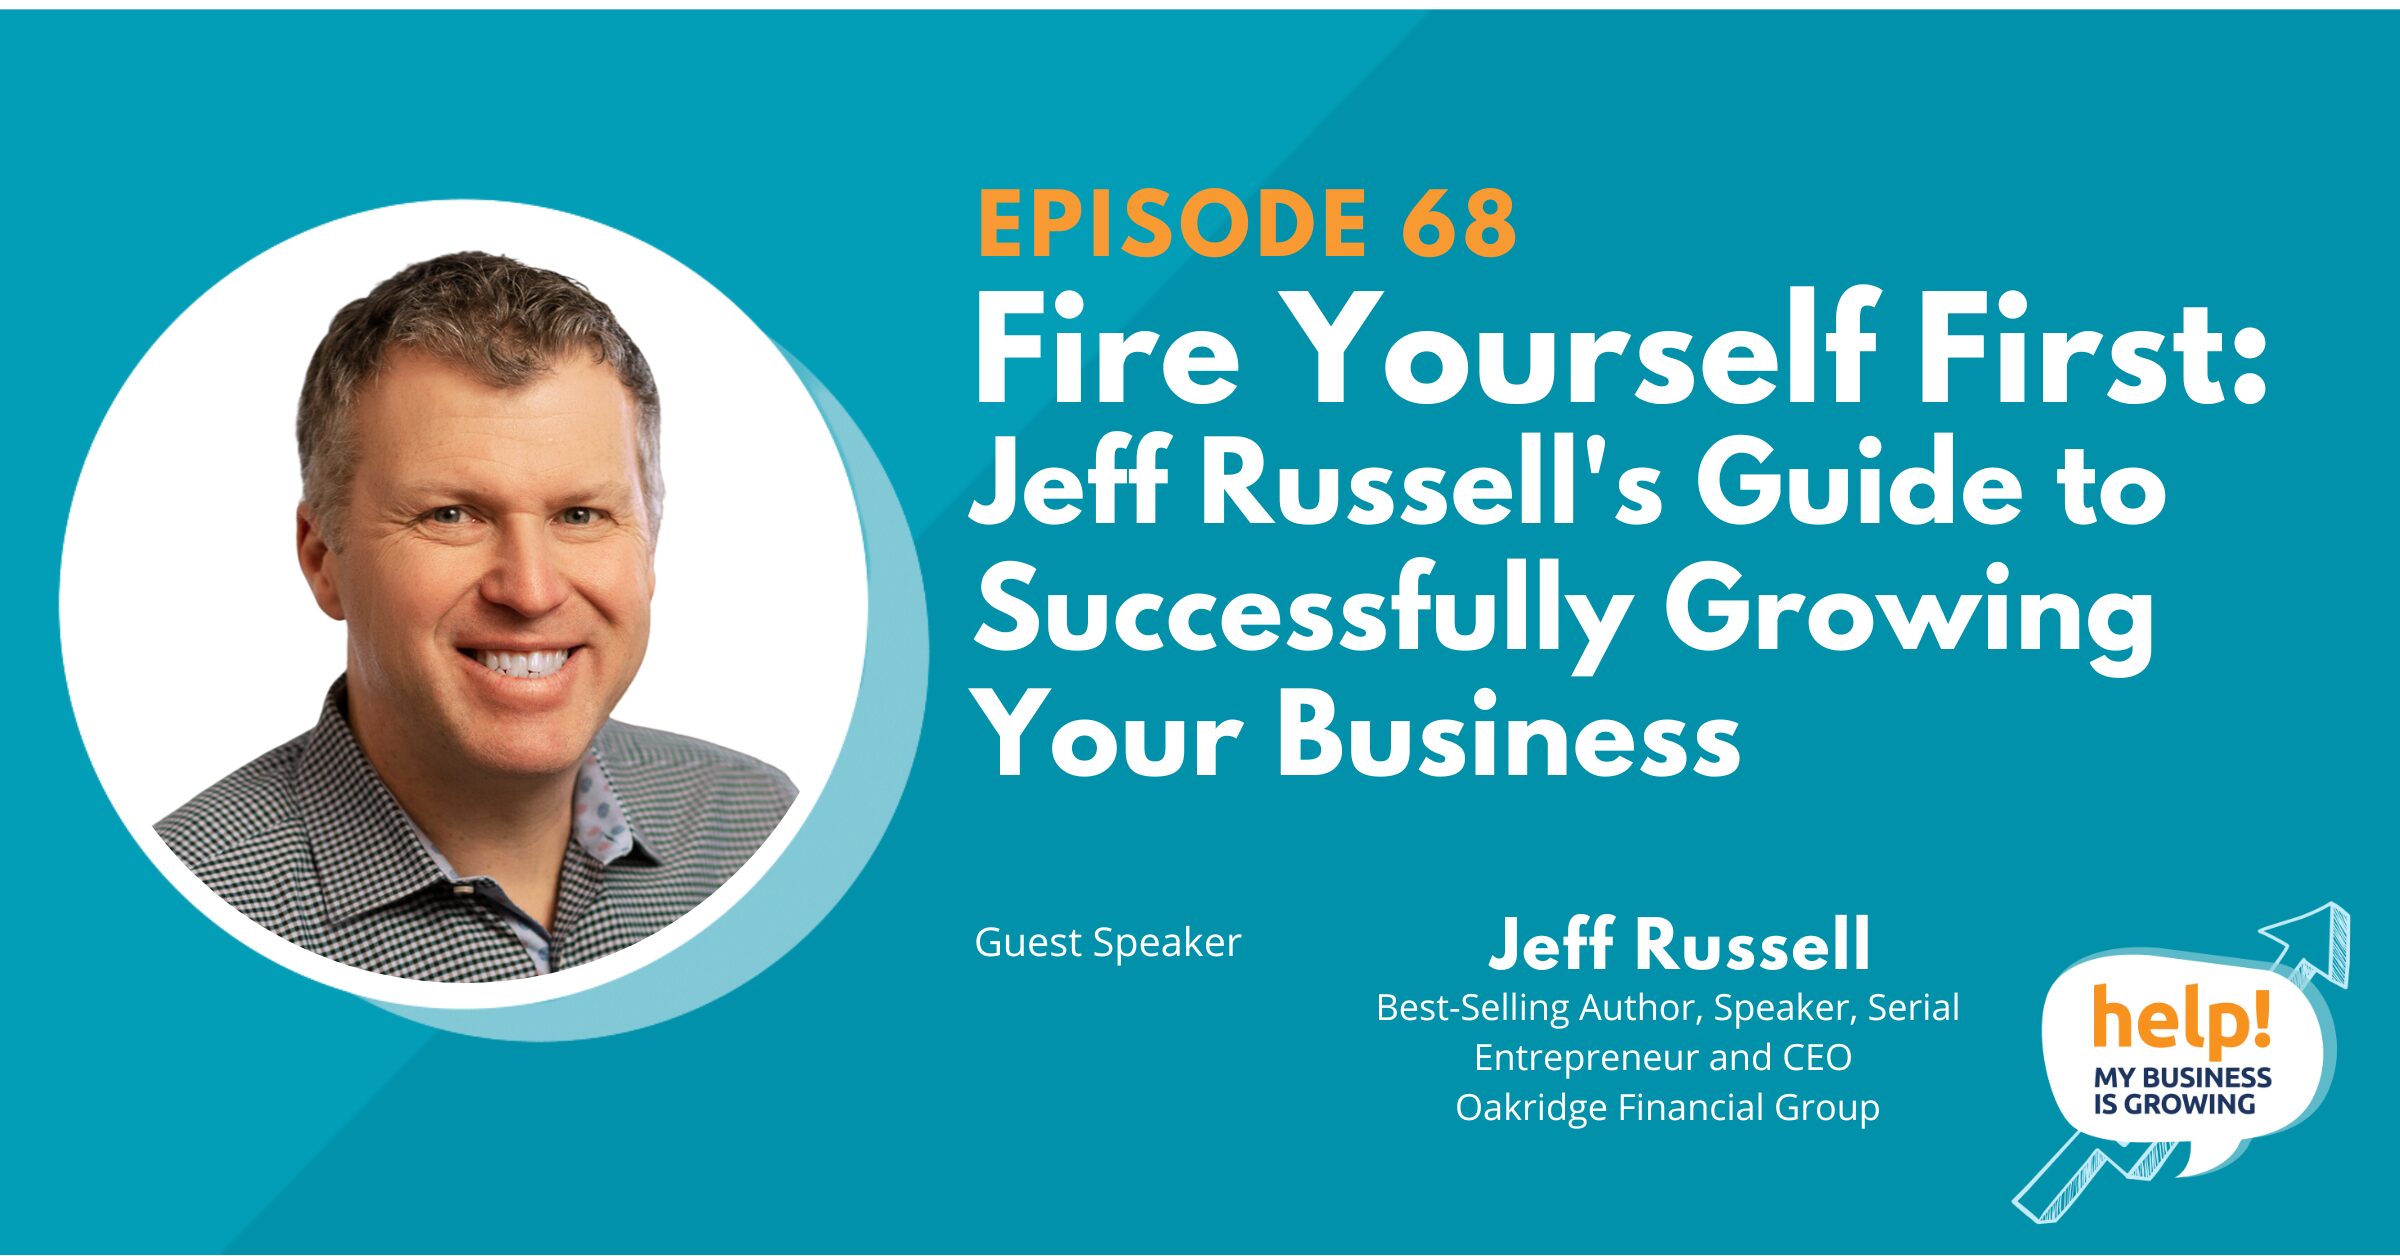 Fire Yourself First: Jeff Russell’s Guide to Successfully Growing Your Business